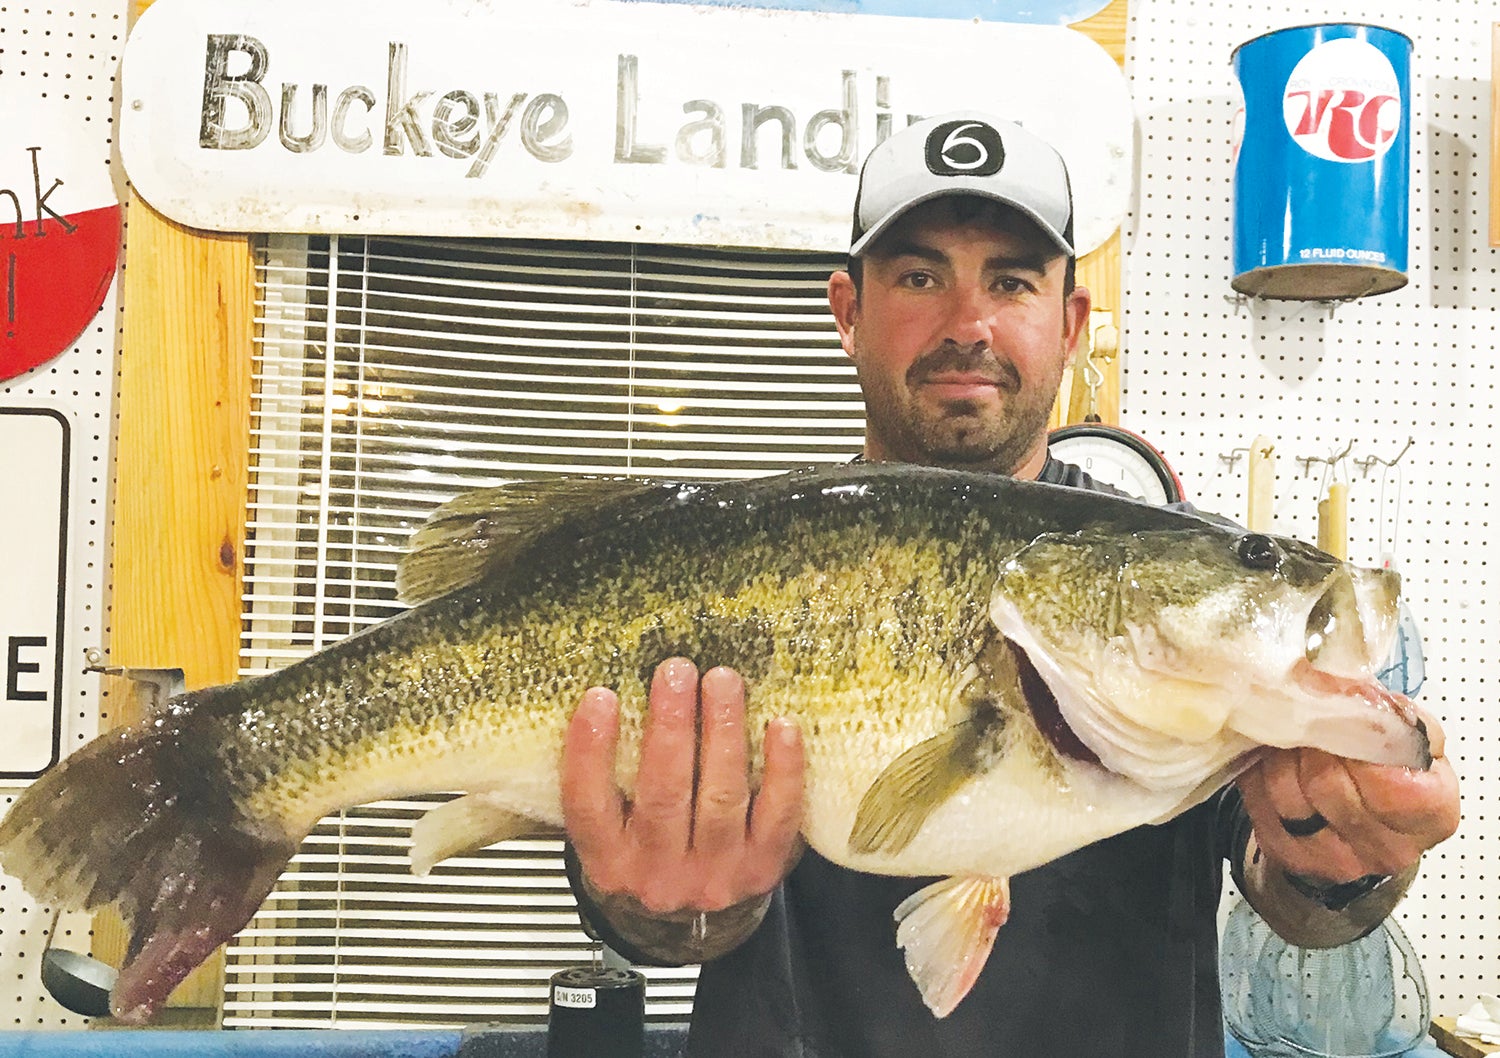 Wanna Step Outside? Huge bass caught, tagged & released 12 miles